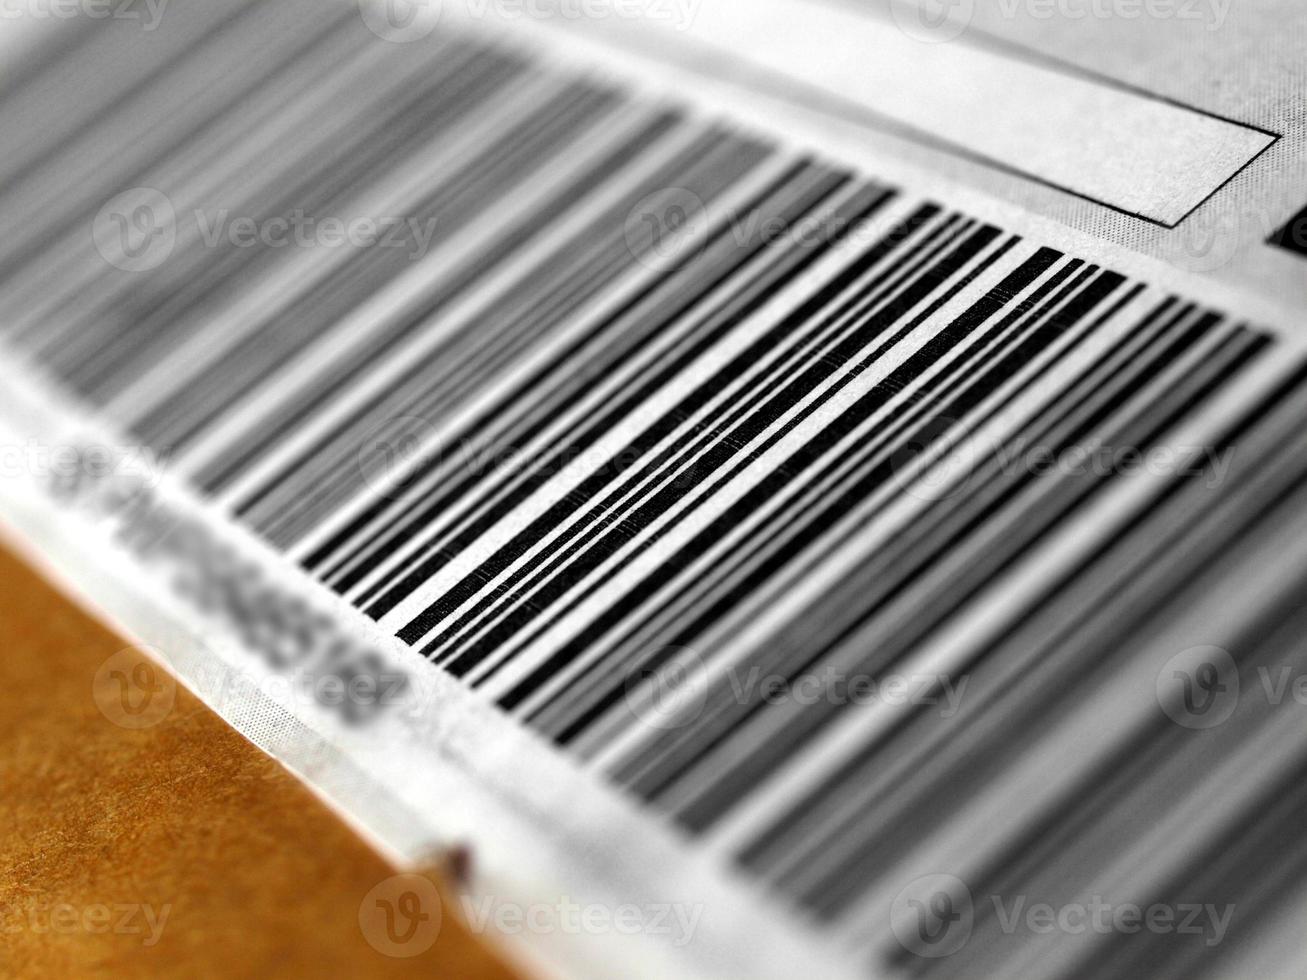 Barcode product identification label photo